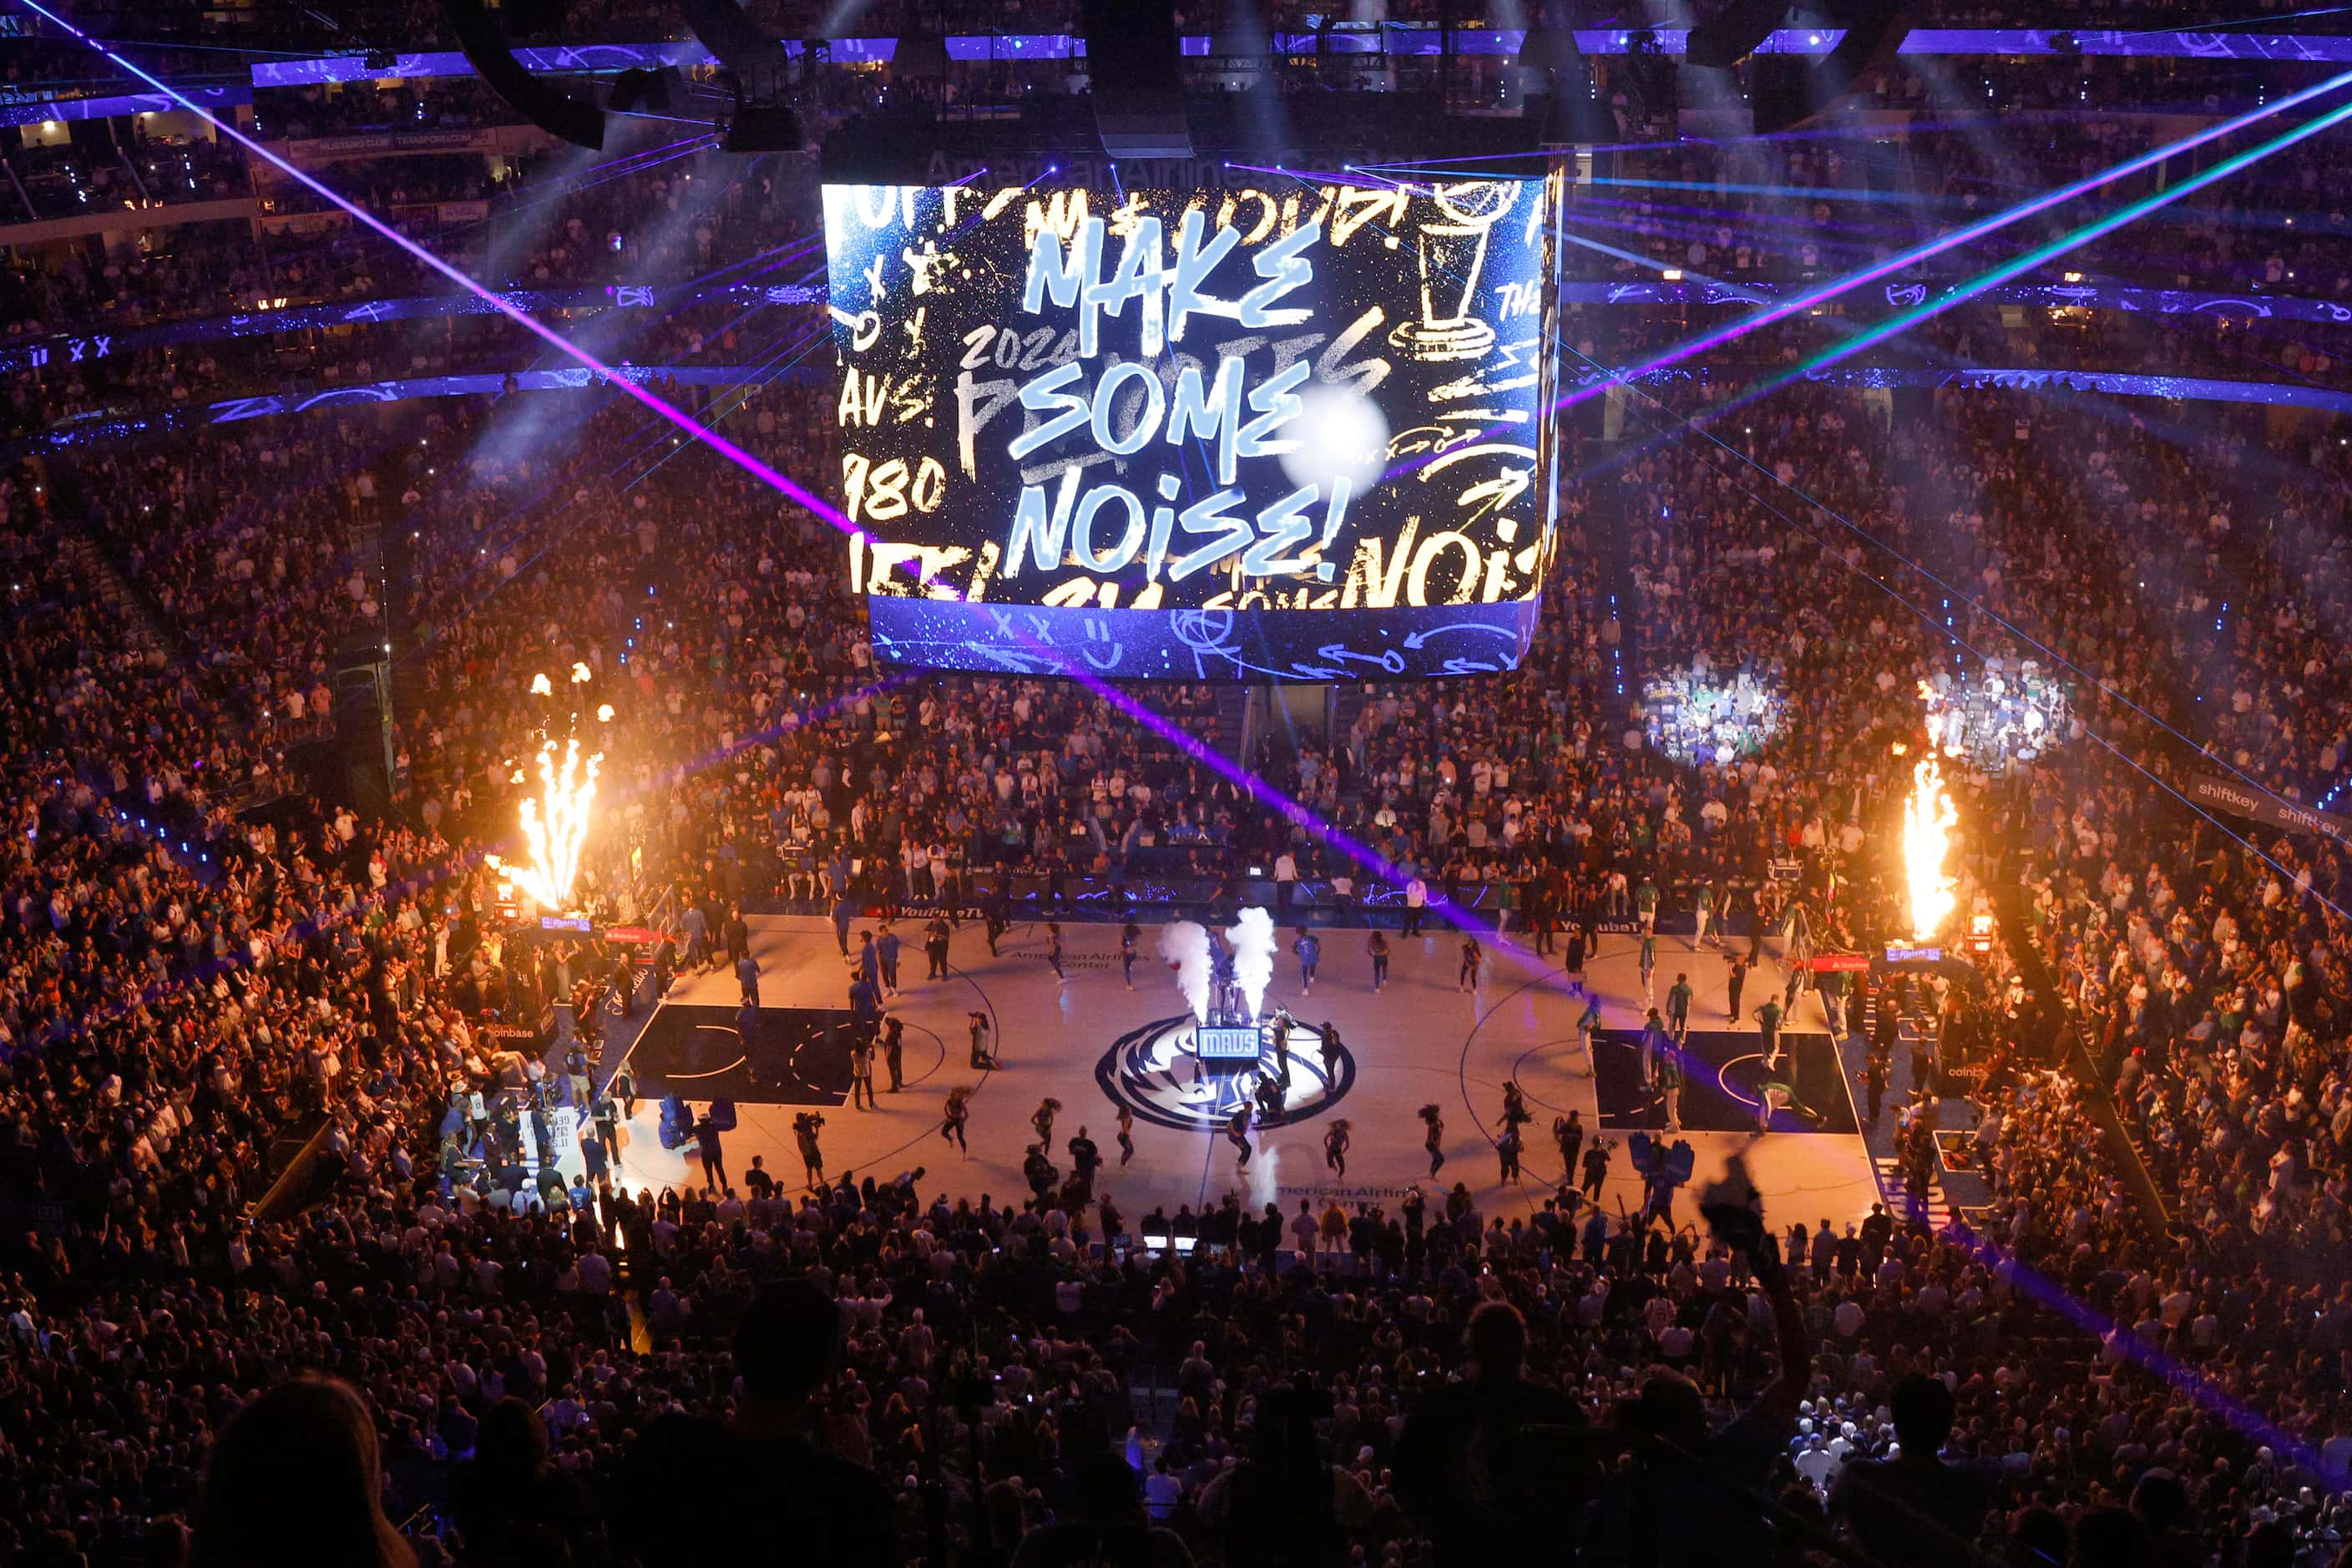 The American Airlines Center is seen during Dallas Mavericks player introductions before...